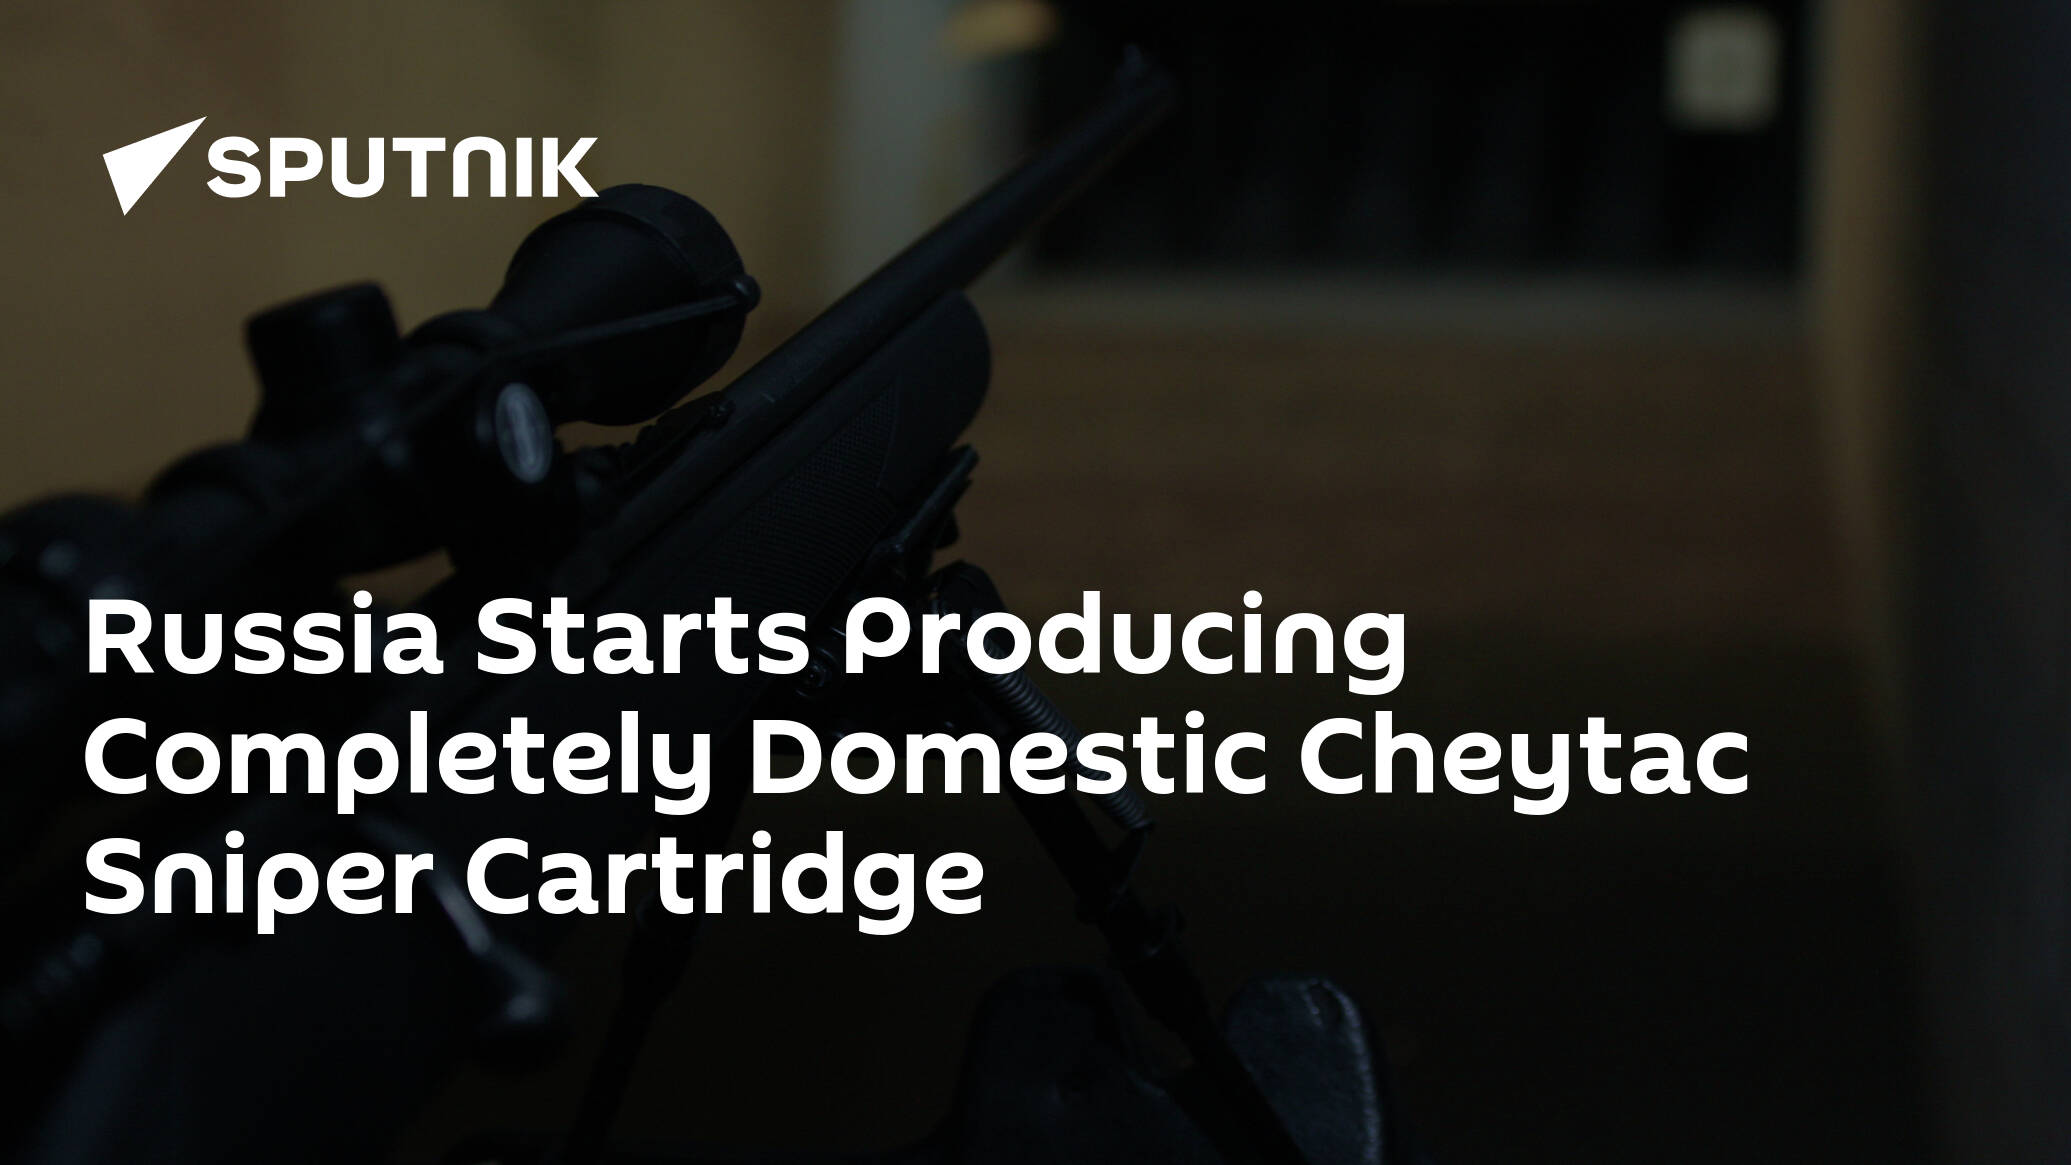 Russia Starts Producing Completely Domestic Cheytac Sniper Cartridge